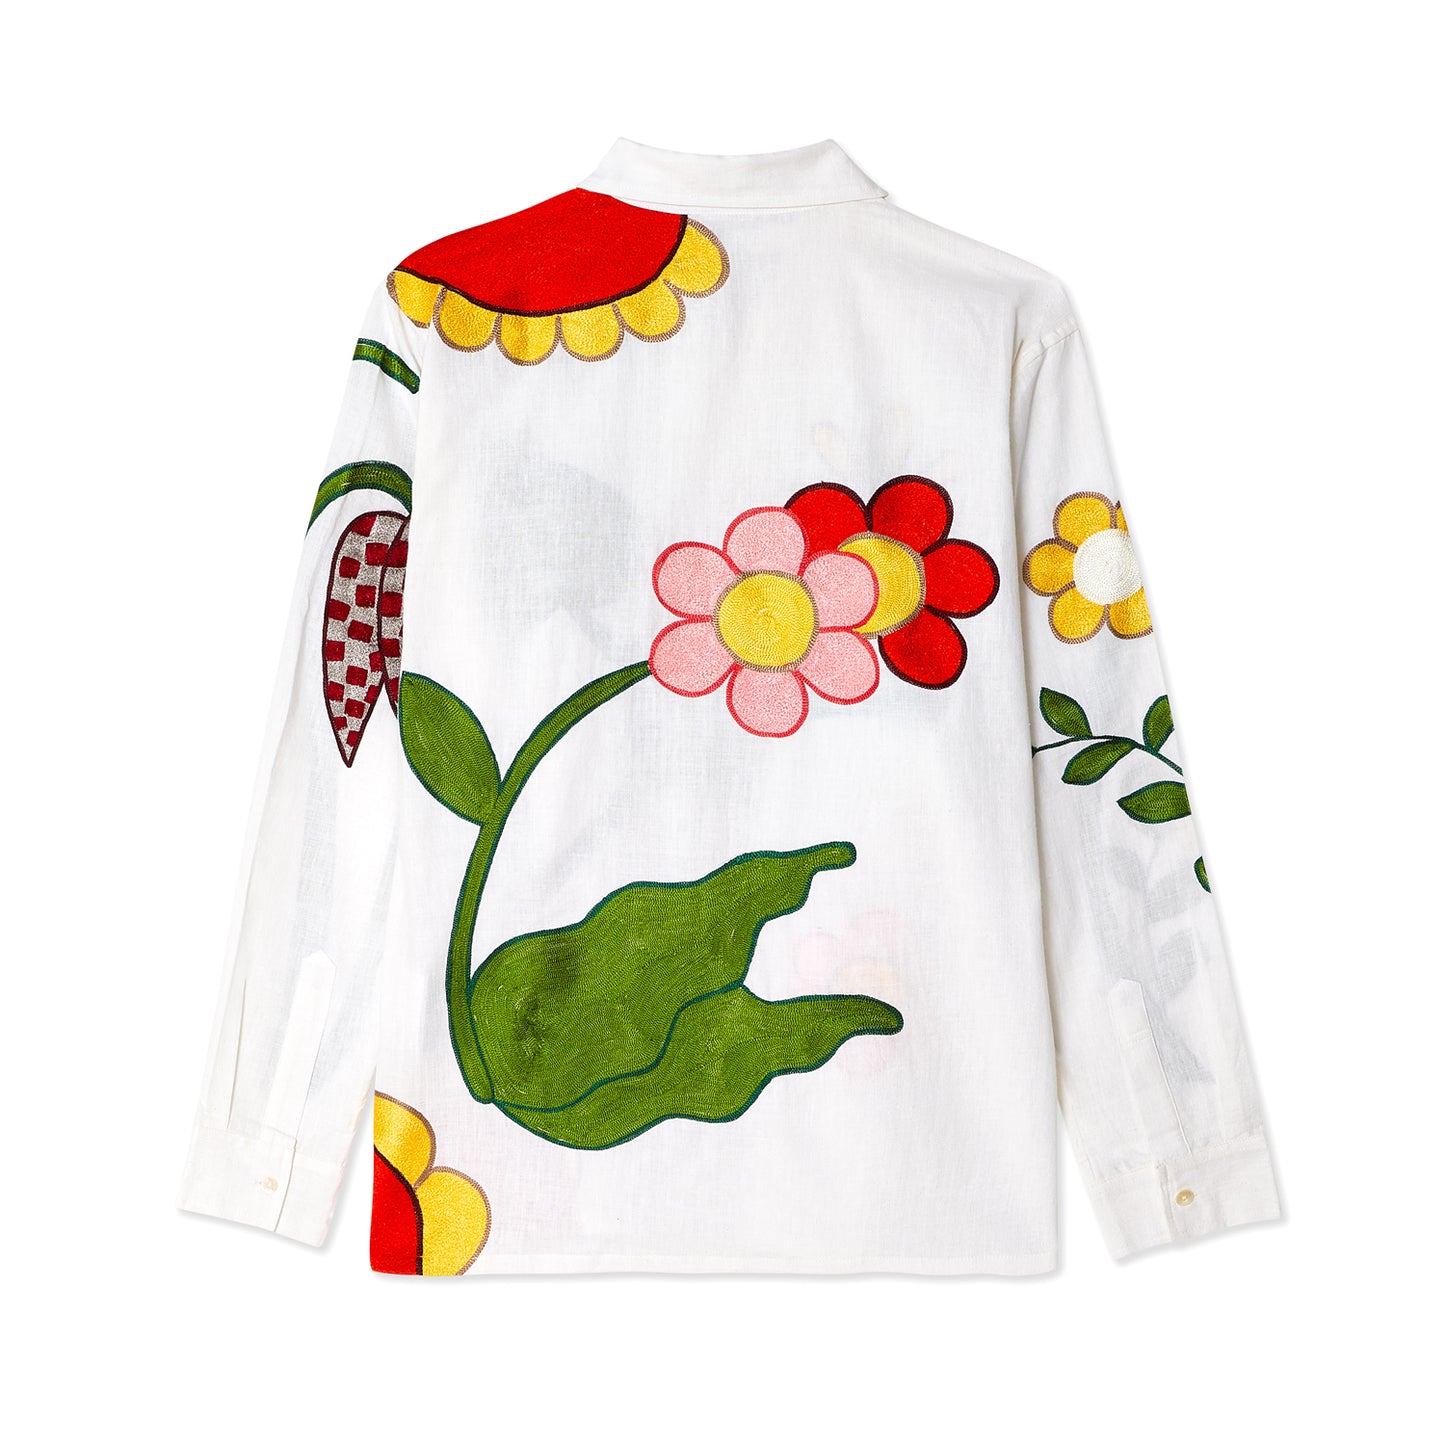 EMBROIDERED FLOWER SHIRT